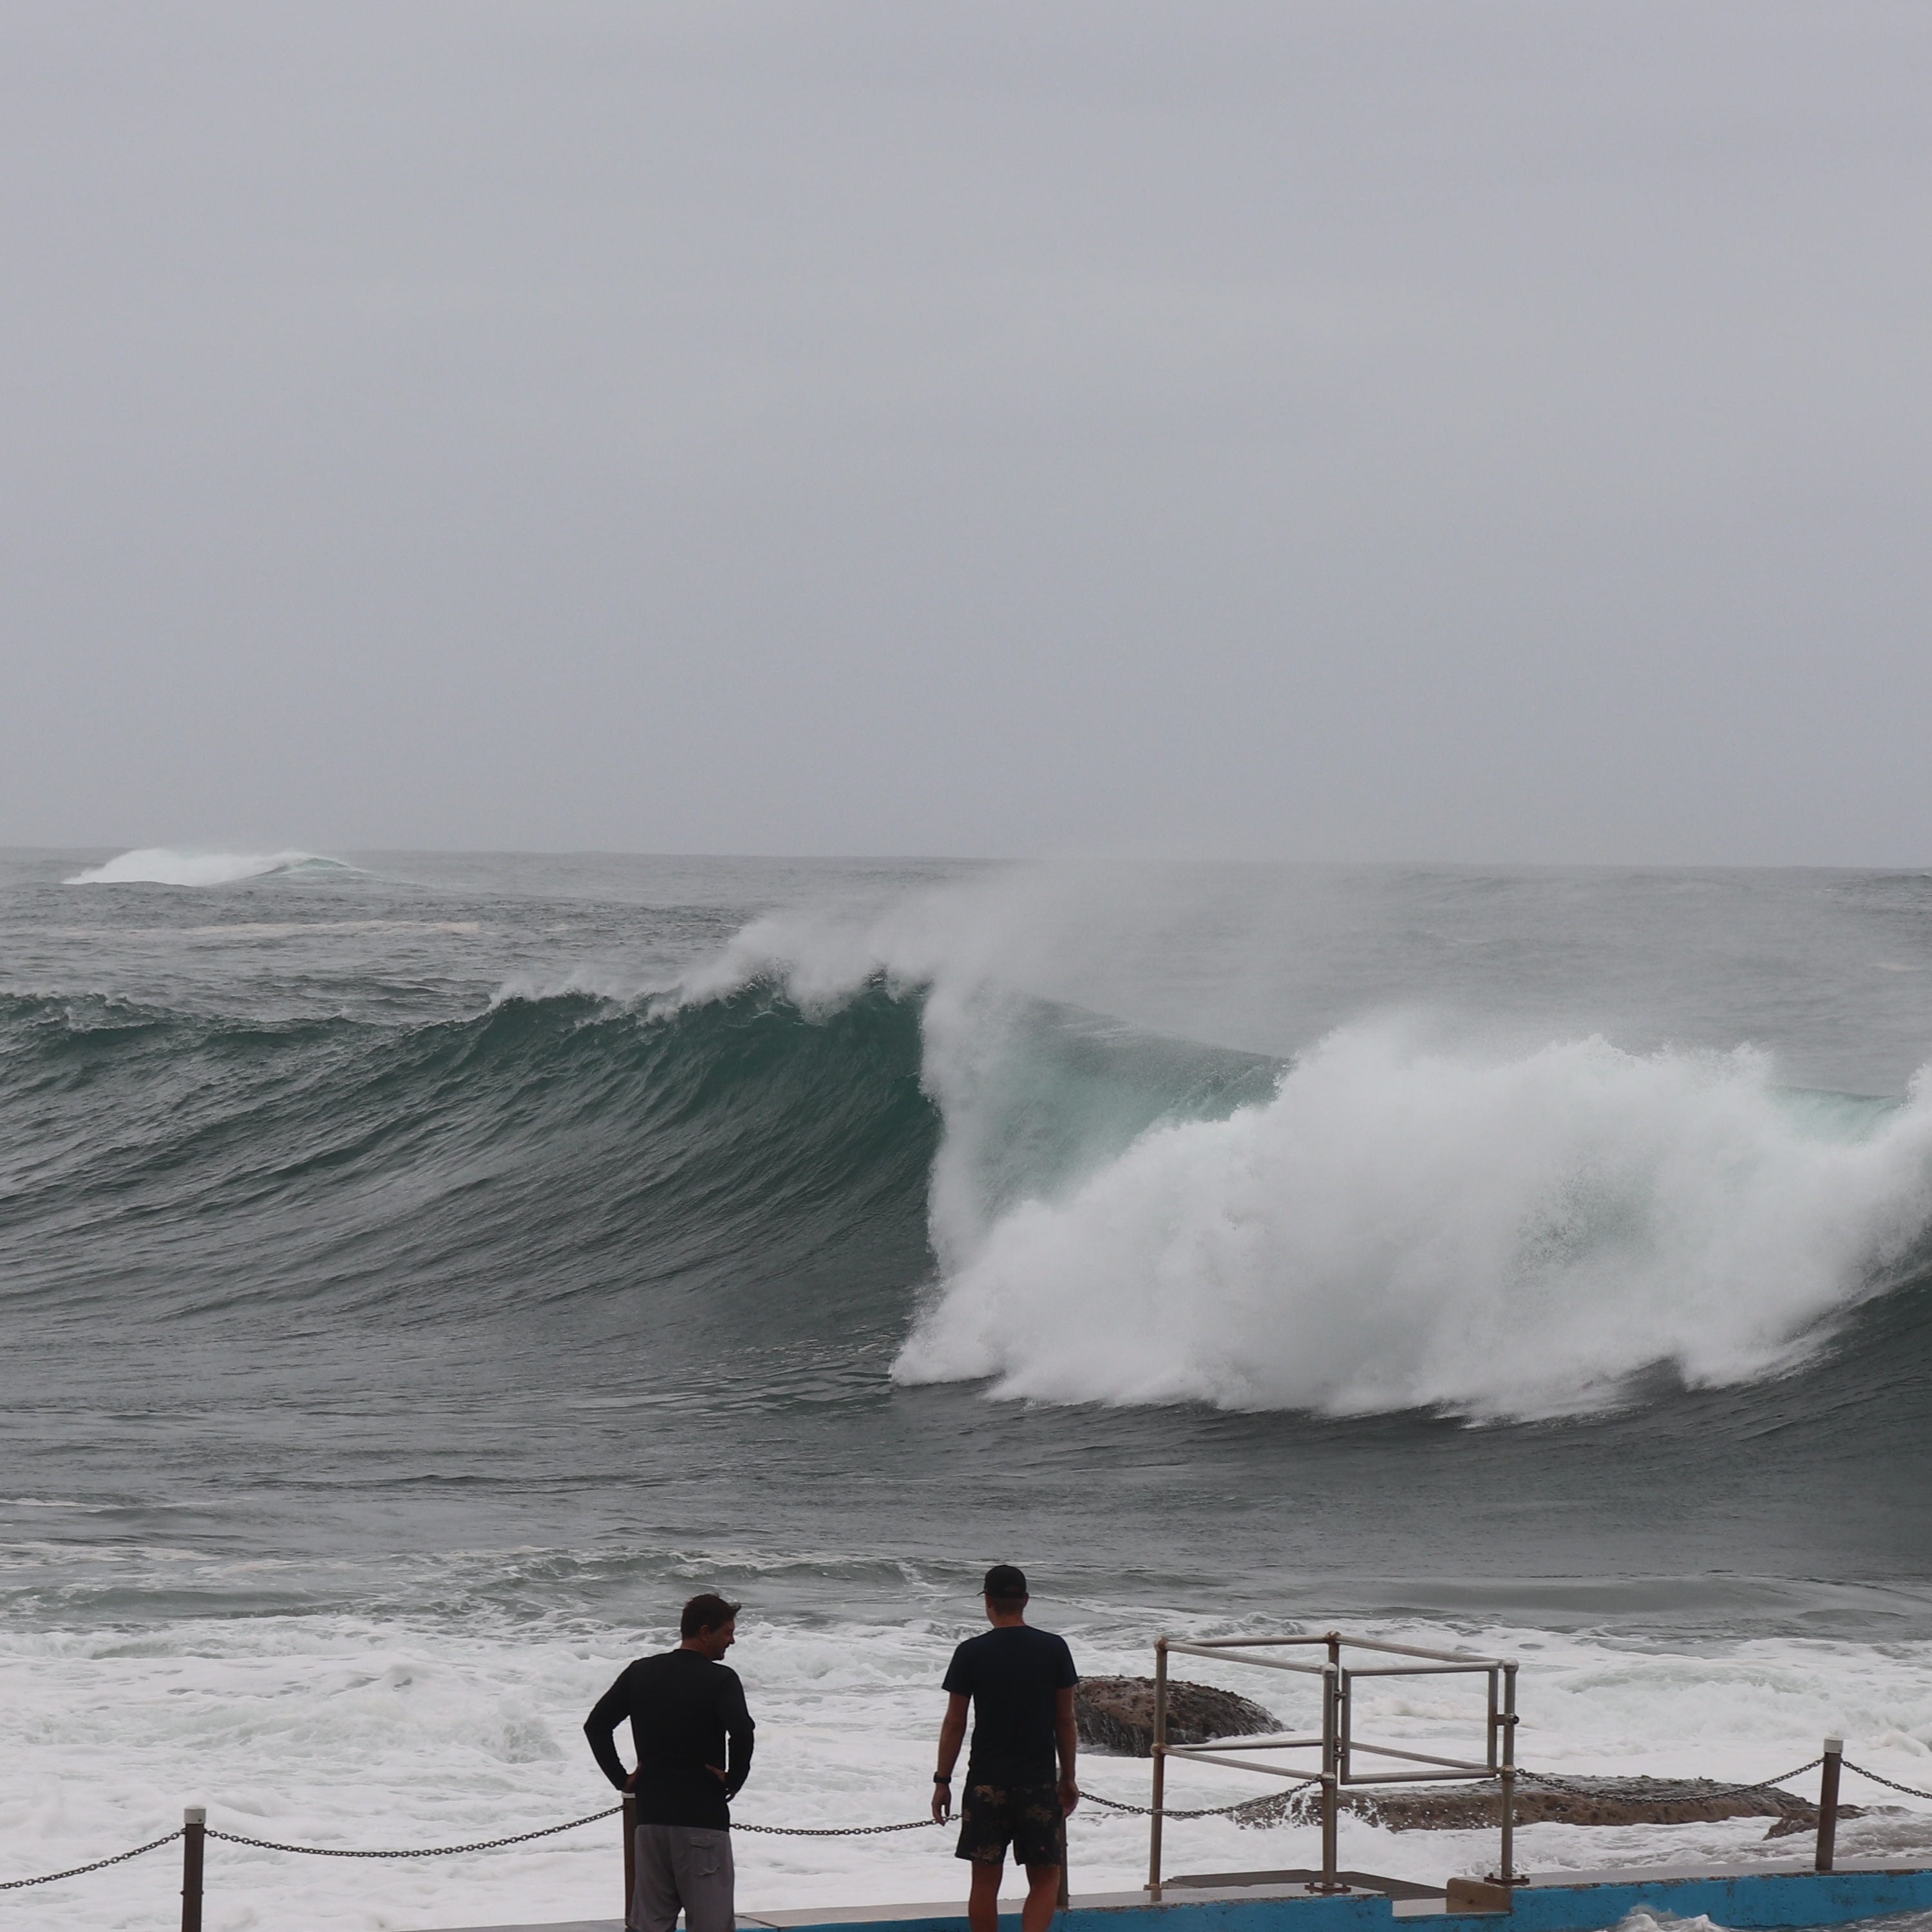 Chunky surf on the way for New South Wales